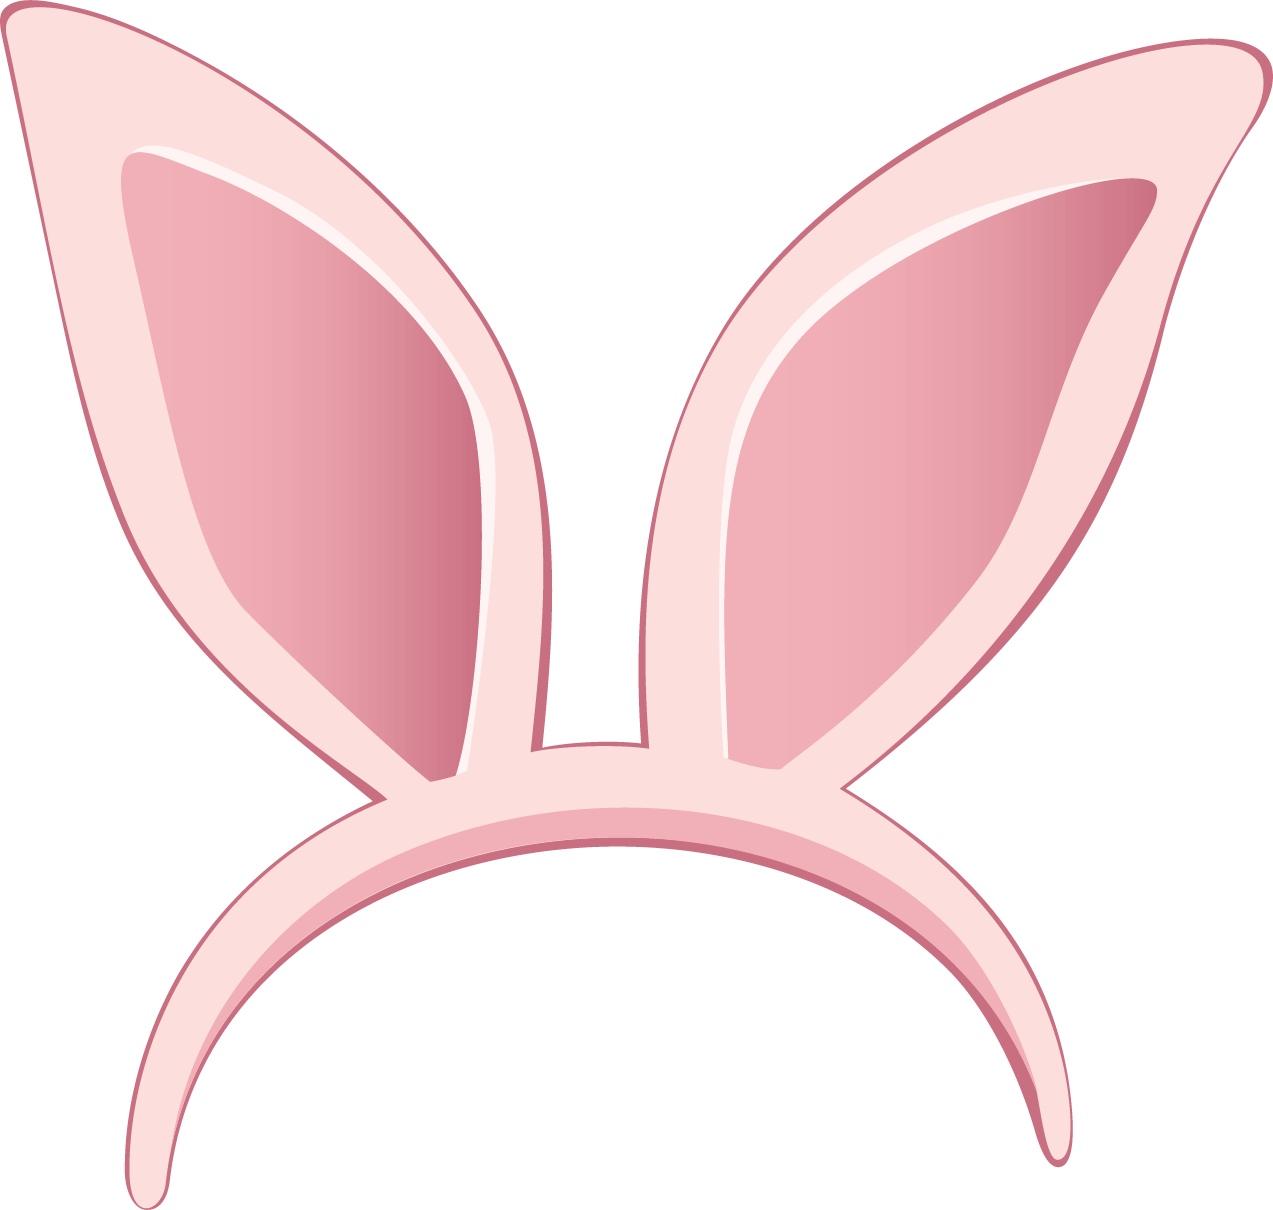 Free Bunny Ears Clipart, Download Free Bunny Ears Clipart png images